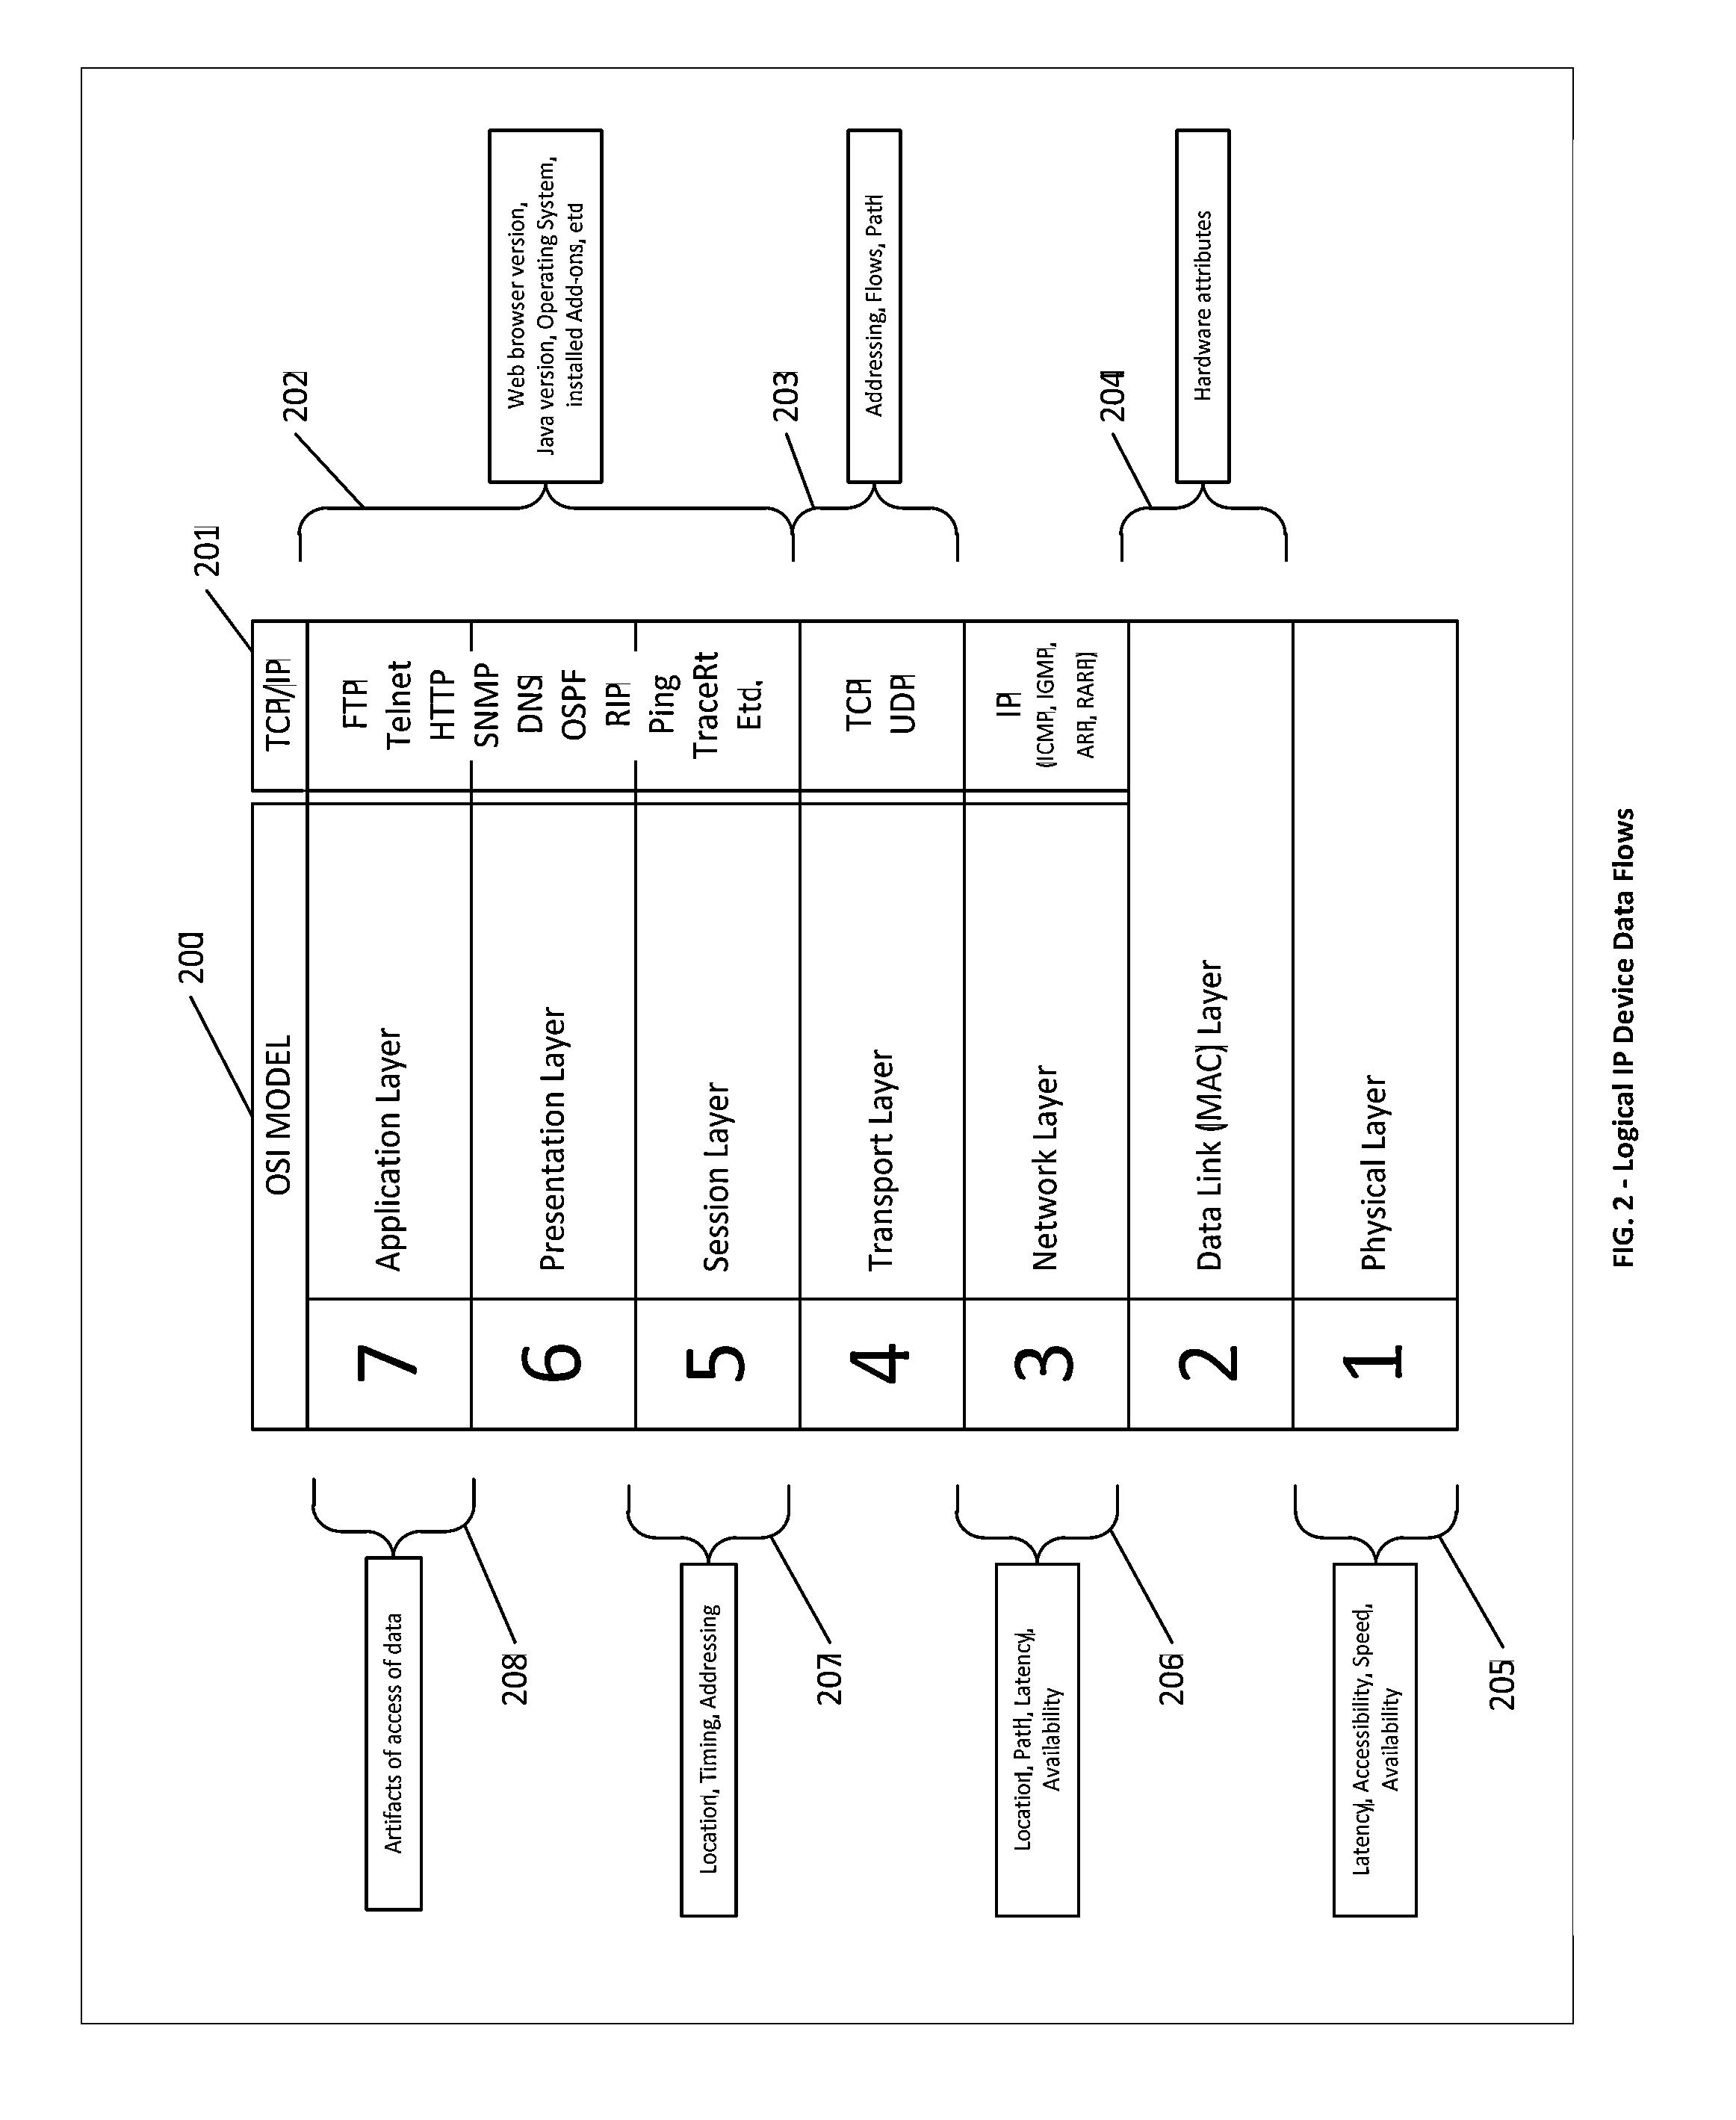 Systems, methods and devices for providing device authentication, mitigation and risk analysis in the internet and cloud